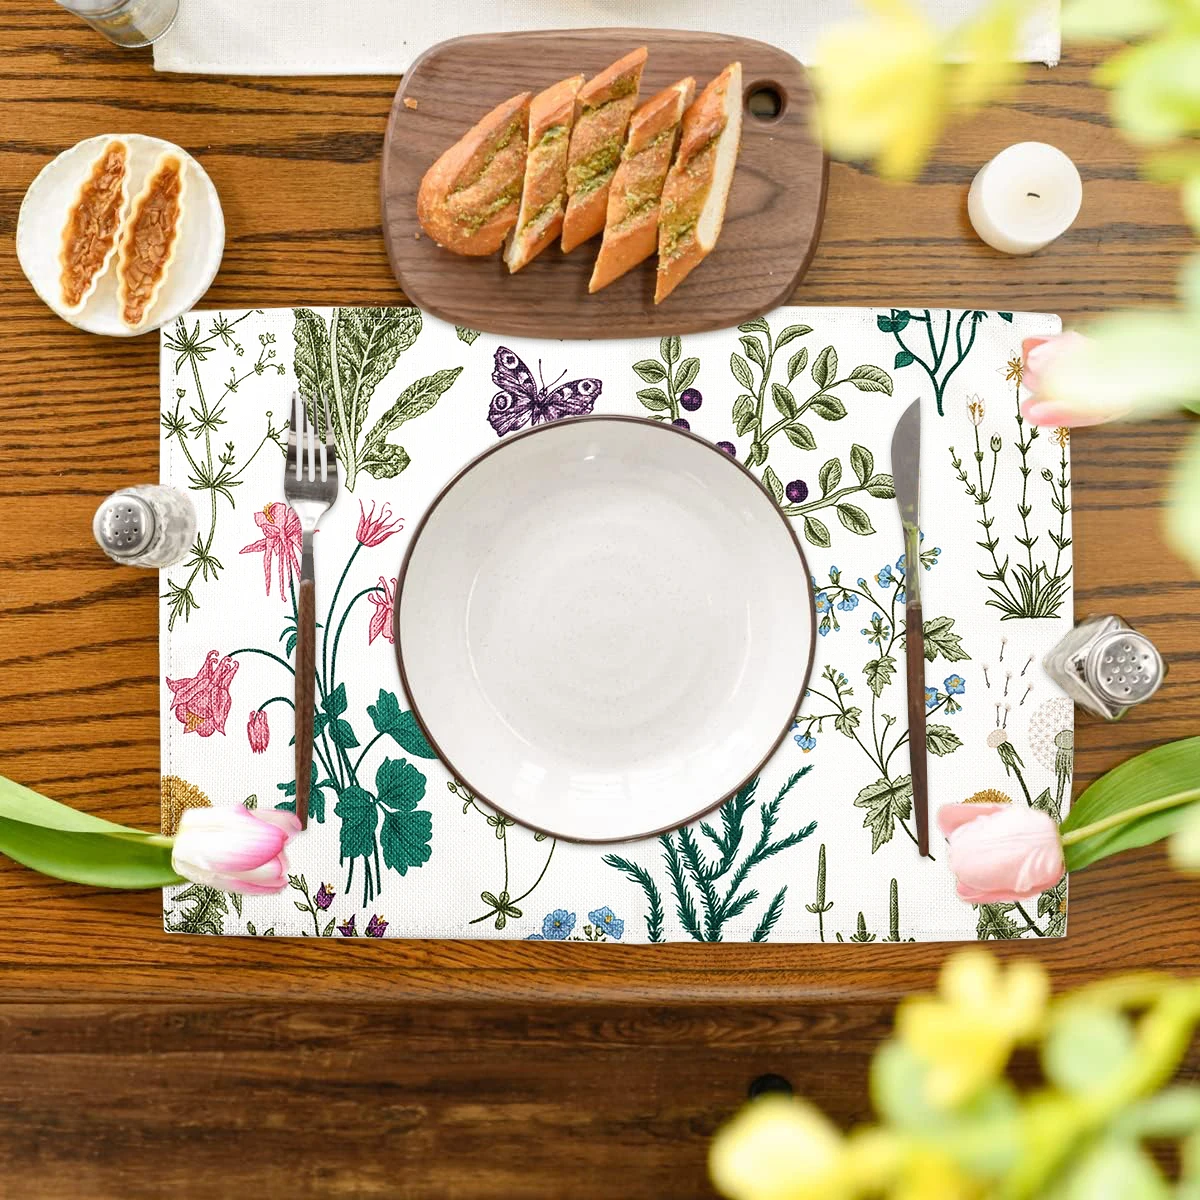 

Wildflower Floral Placemats Eucalyptus Leaves Table Mats Dining Table Supplies Spring Rustic Washable Table Mats Party Decors